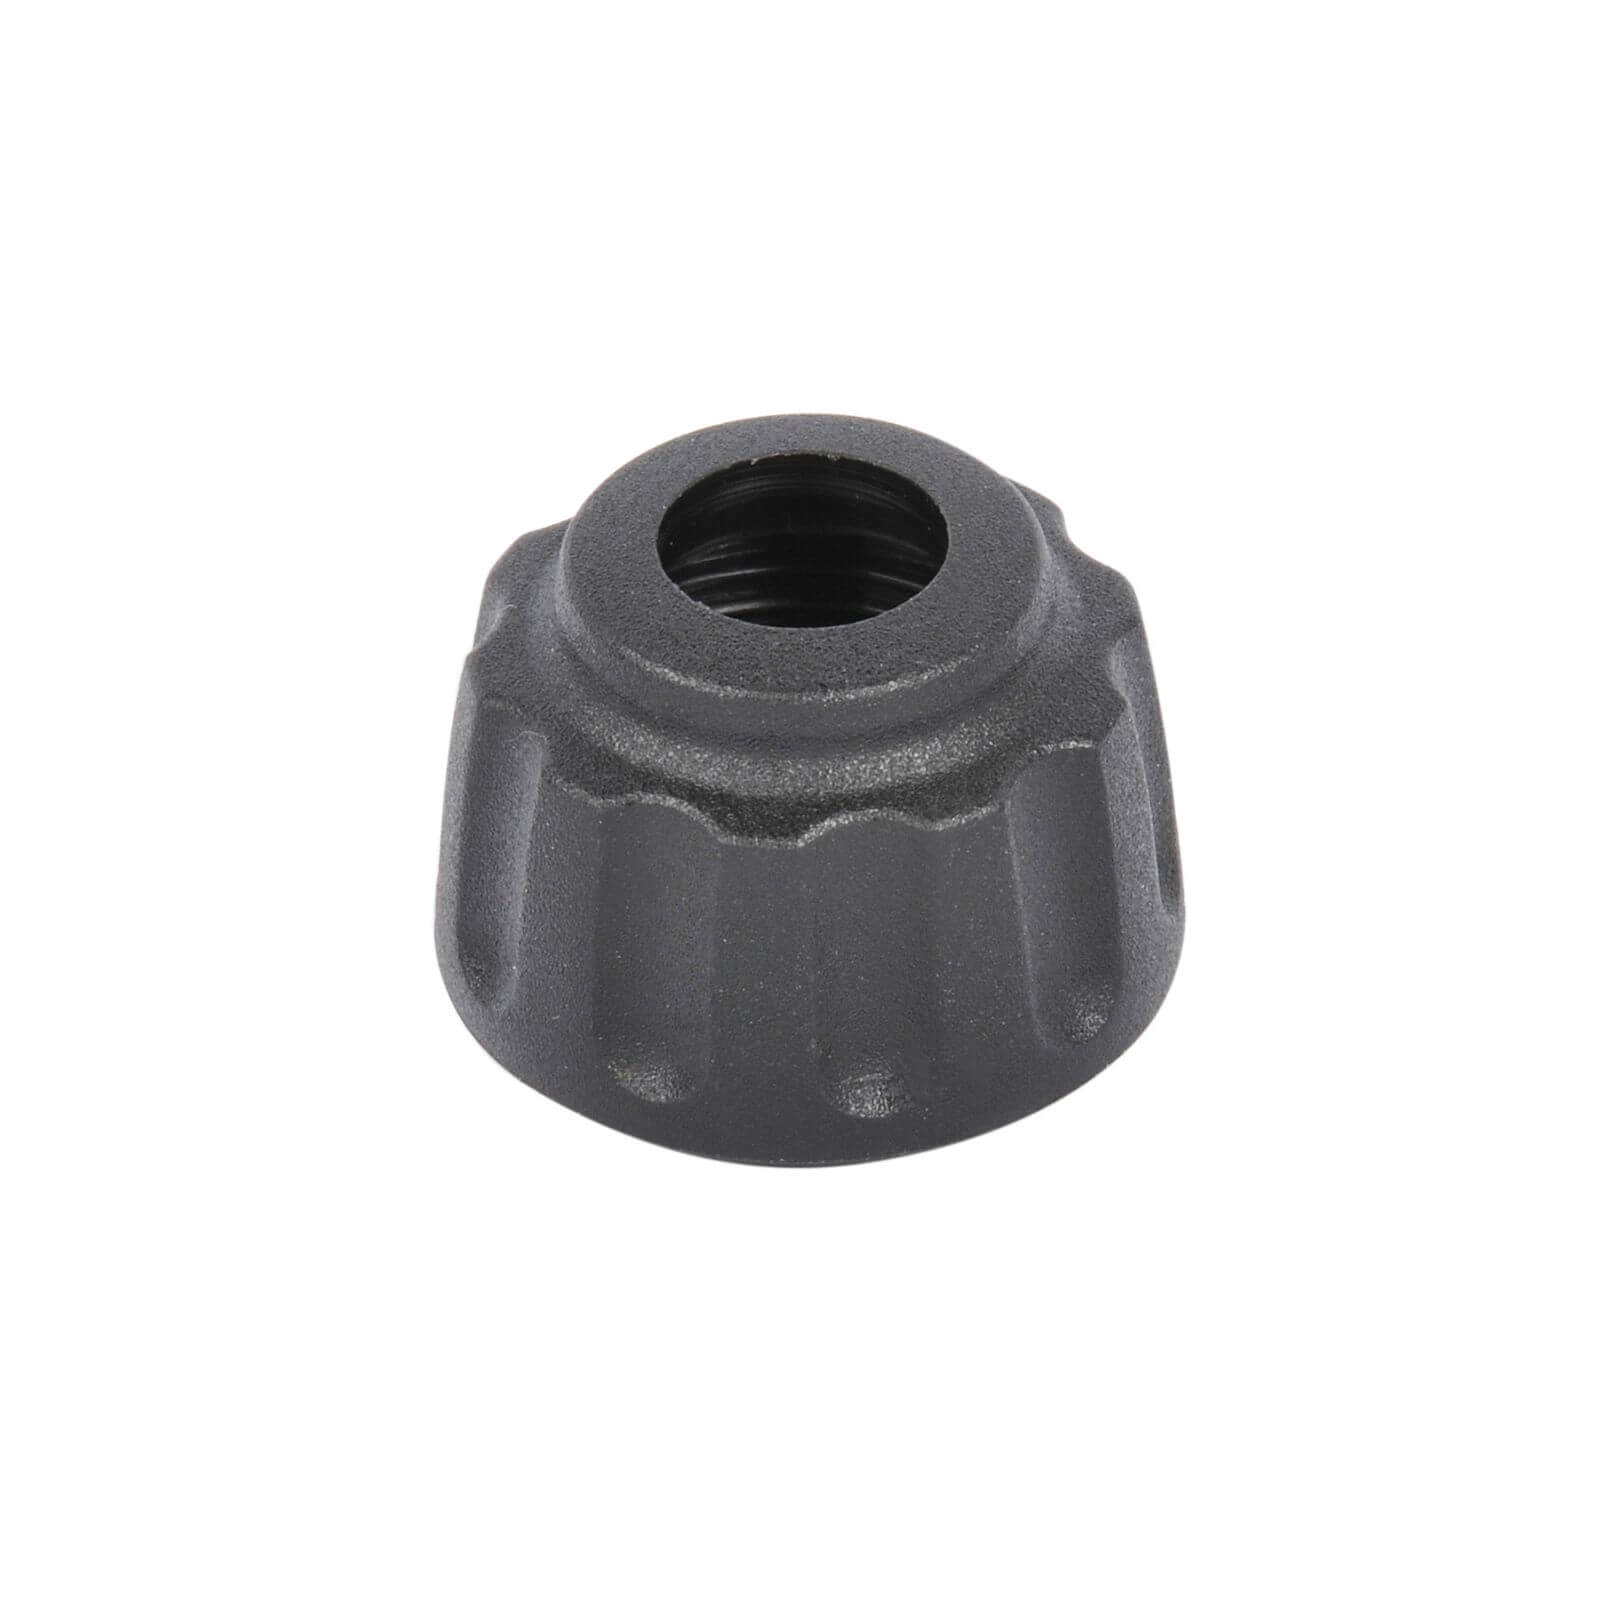 Hozelock Adaptor Nut for Automatic Watering System (Pack of 5)